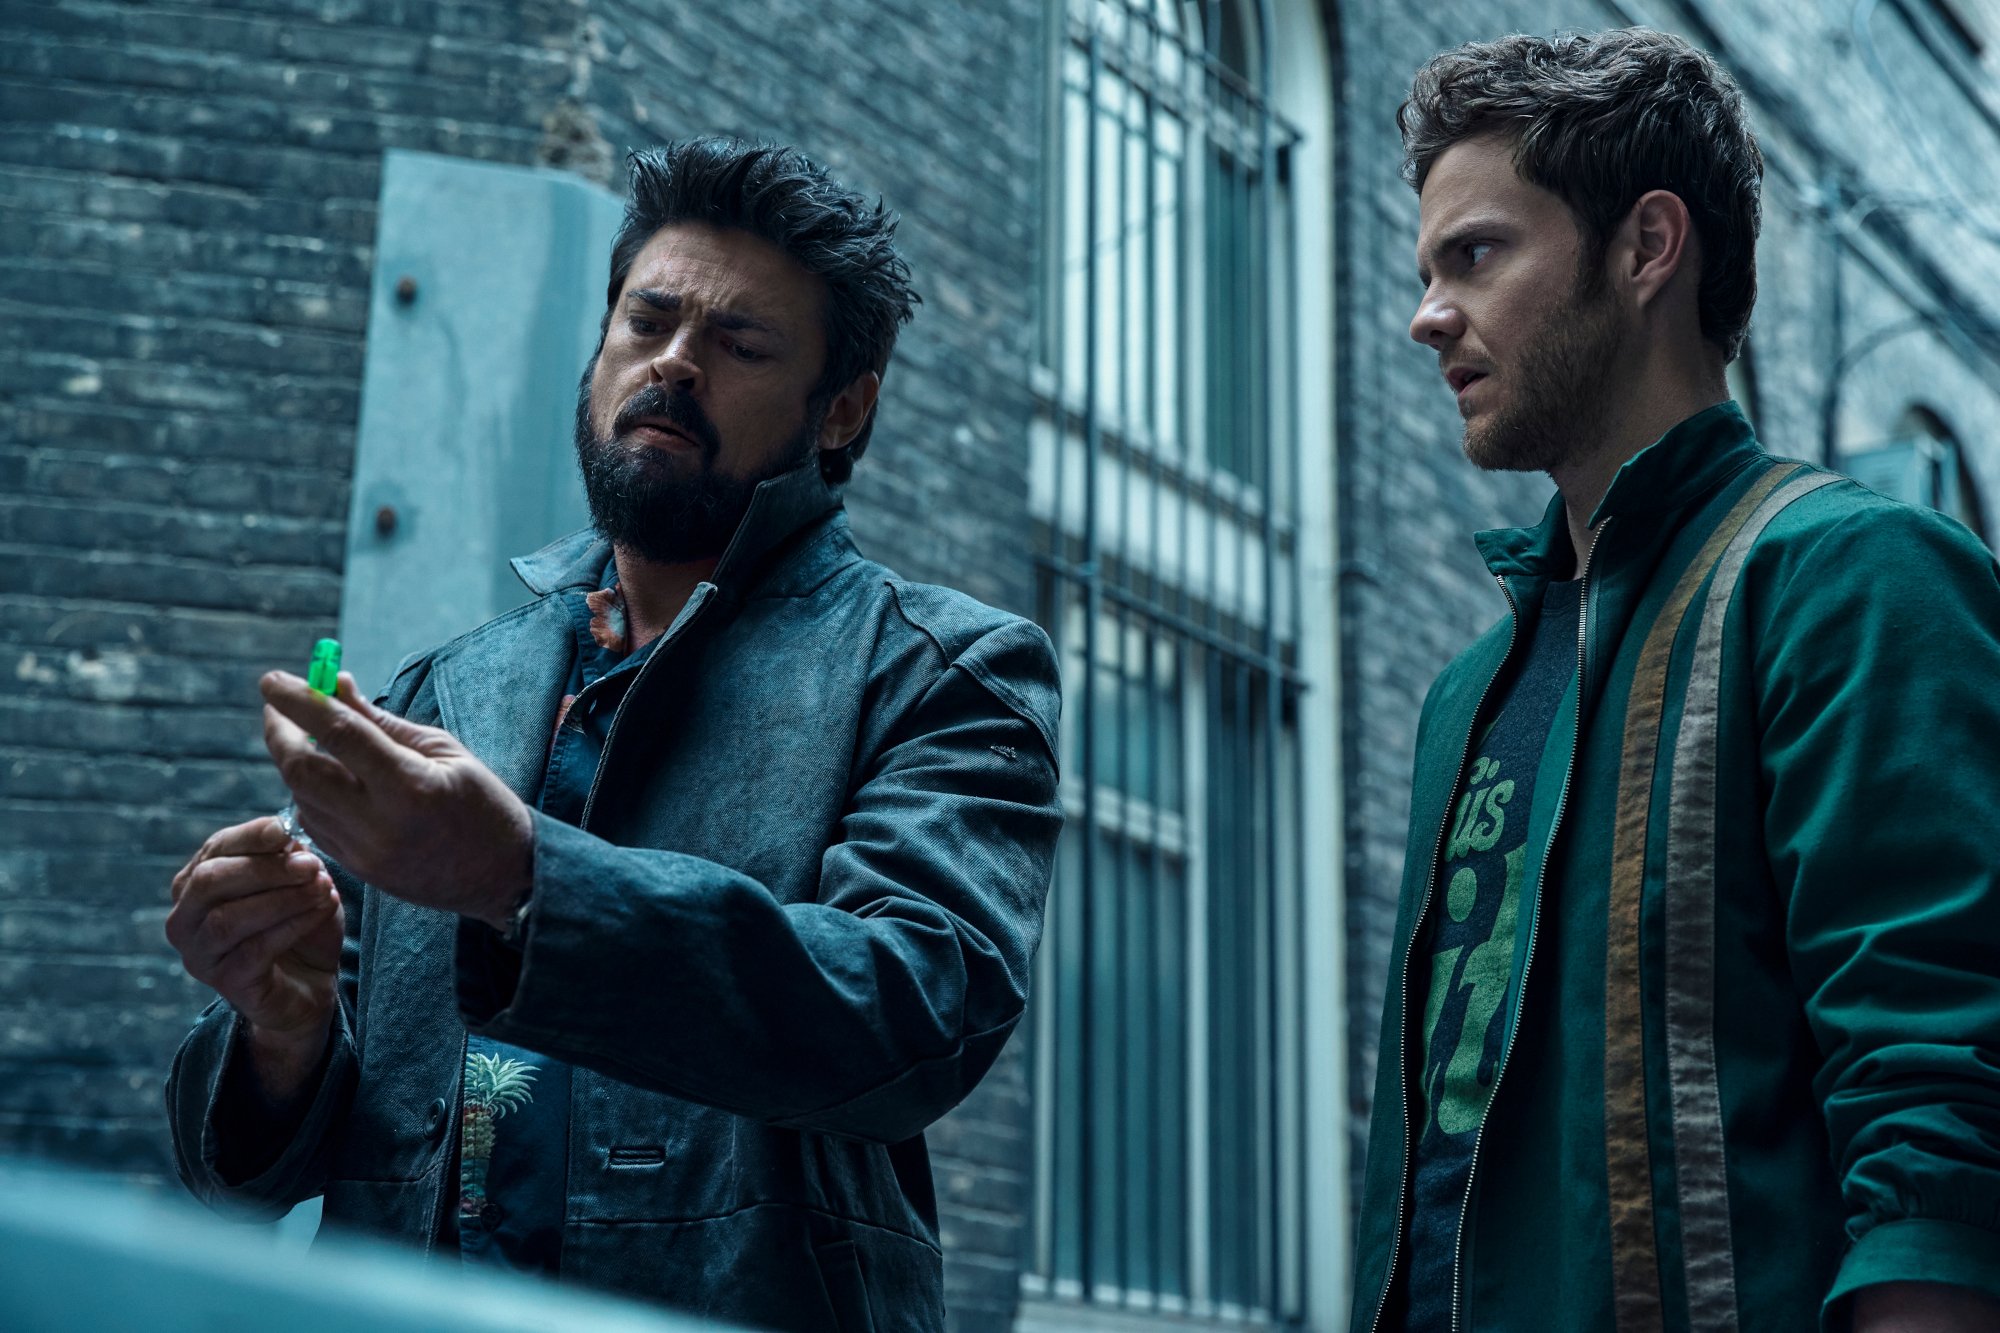 Karl Urban and Jack Quaid as Billy Butcher and Hughie Campbell in 'The Boys' Season 3 Episode 5, which will be followed by episode 6 on its June 24 release date. Butcher and Hughie are standing behind the trunk of a car, and Butcher is filling a syringe with Temp V.